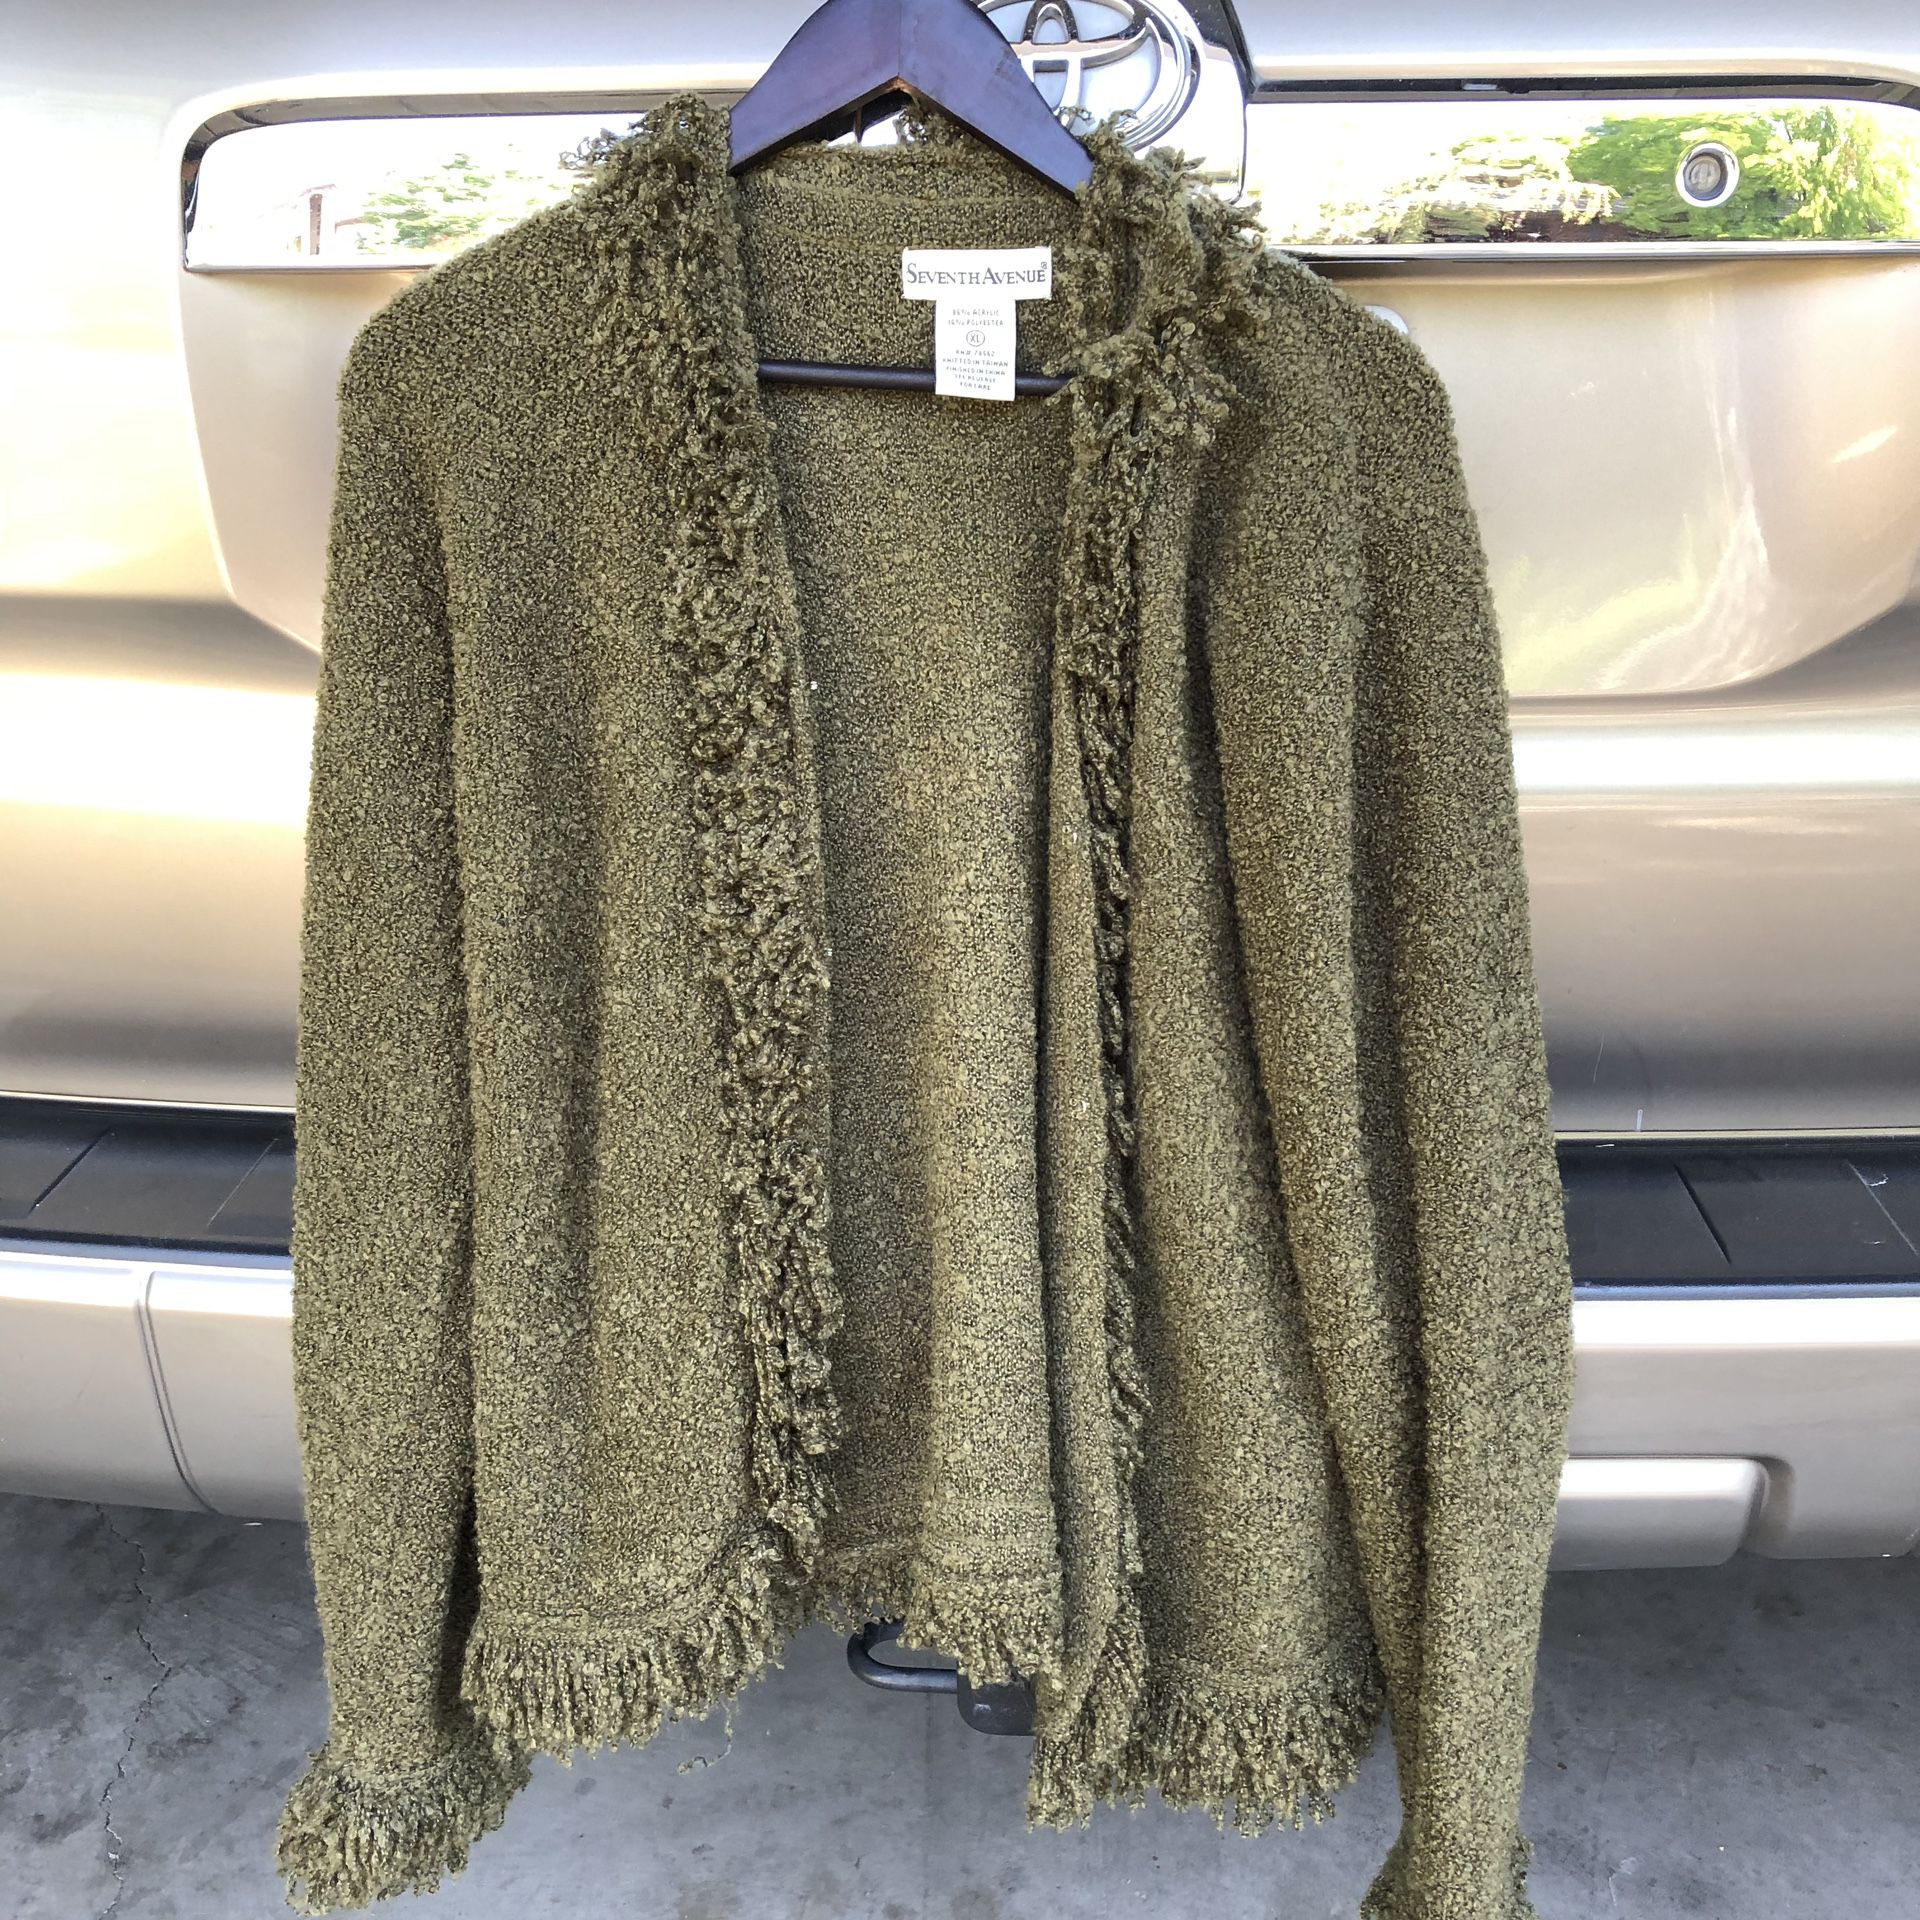 Olive Green Sweater